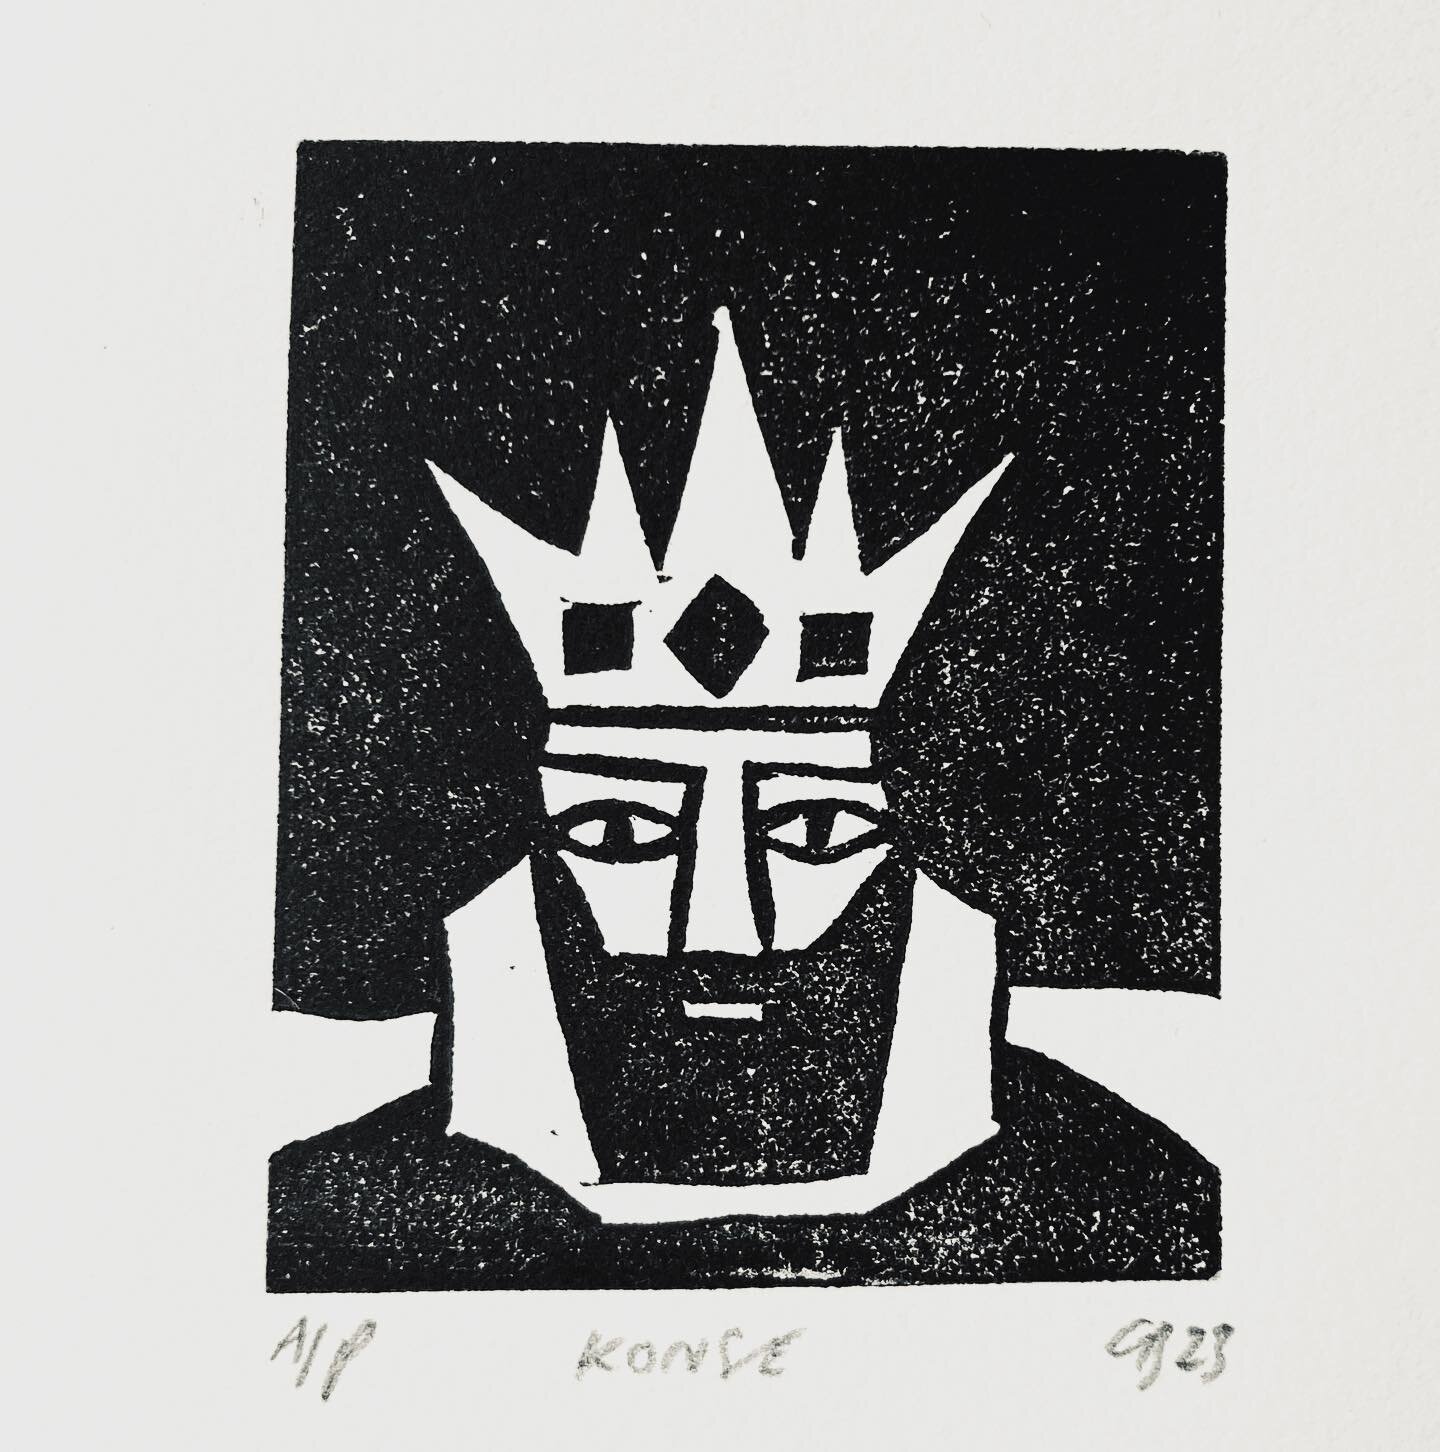 👑KONIGE 👑 Small Linocut by @christopherbrownlino . 👑Image Size: 6 x 5 👑Paper Size: 19 x 13 👑Unframed 👑Available . #konige #konige #k&ouml;nig #k&ouml;nige #king #crown #kingandcrown #crownedking #christopherbrownlino #linocut #smallprint #linop